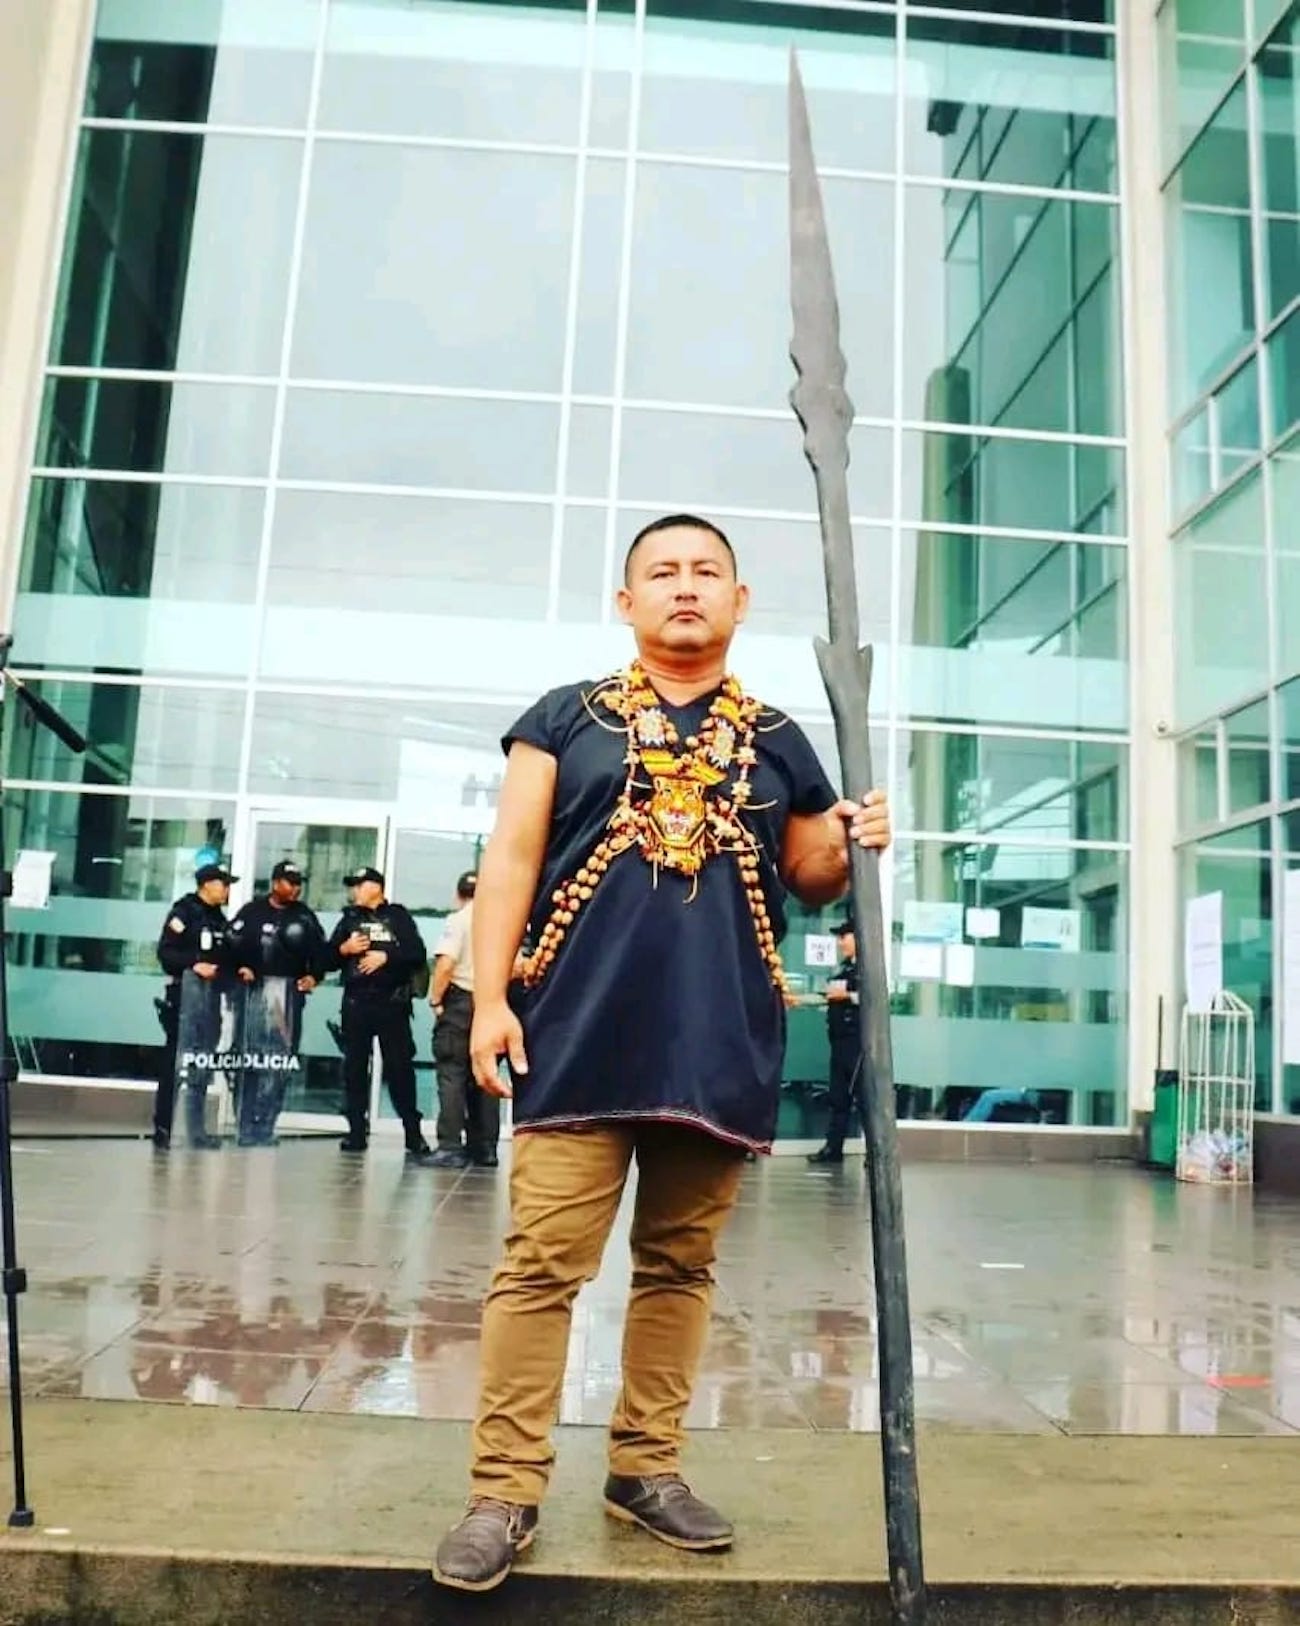 a man stands in front of a glass building holding a long carved stick.